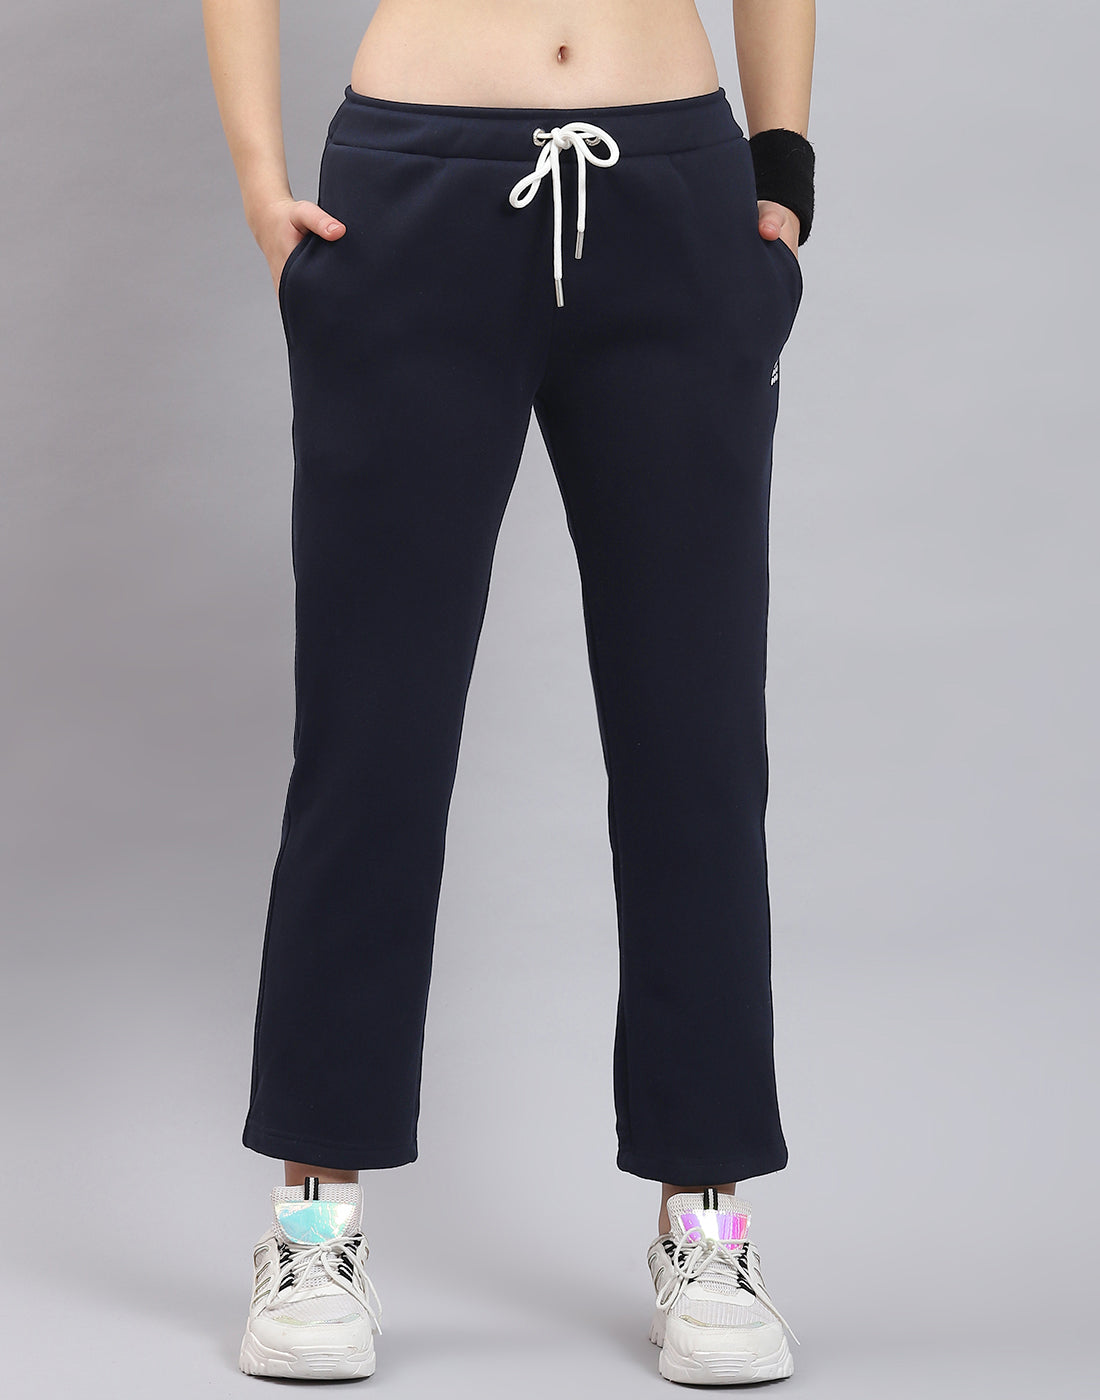 Trackpants: Check Women Light Grey Cotton Trackpants at Cliths